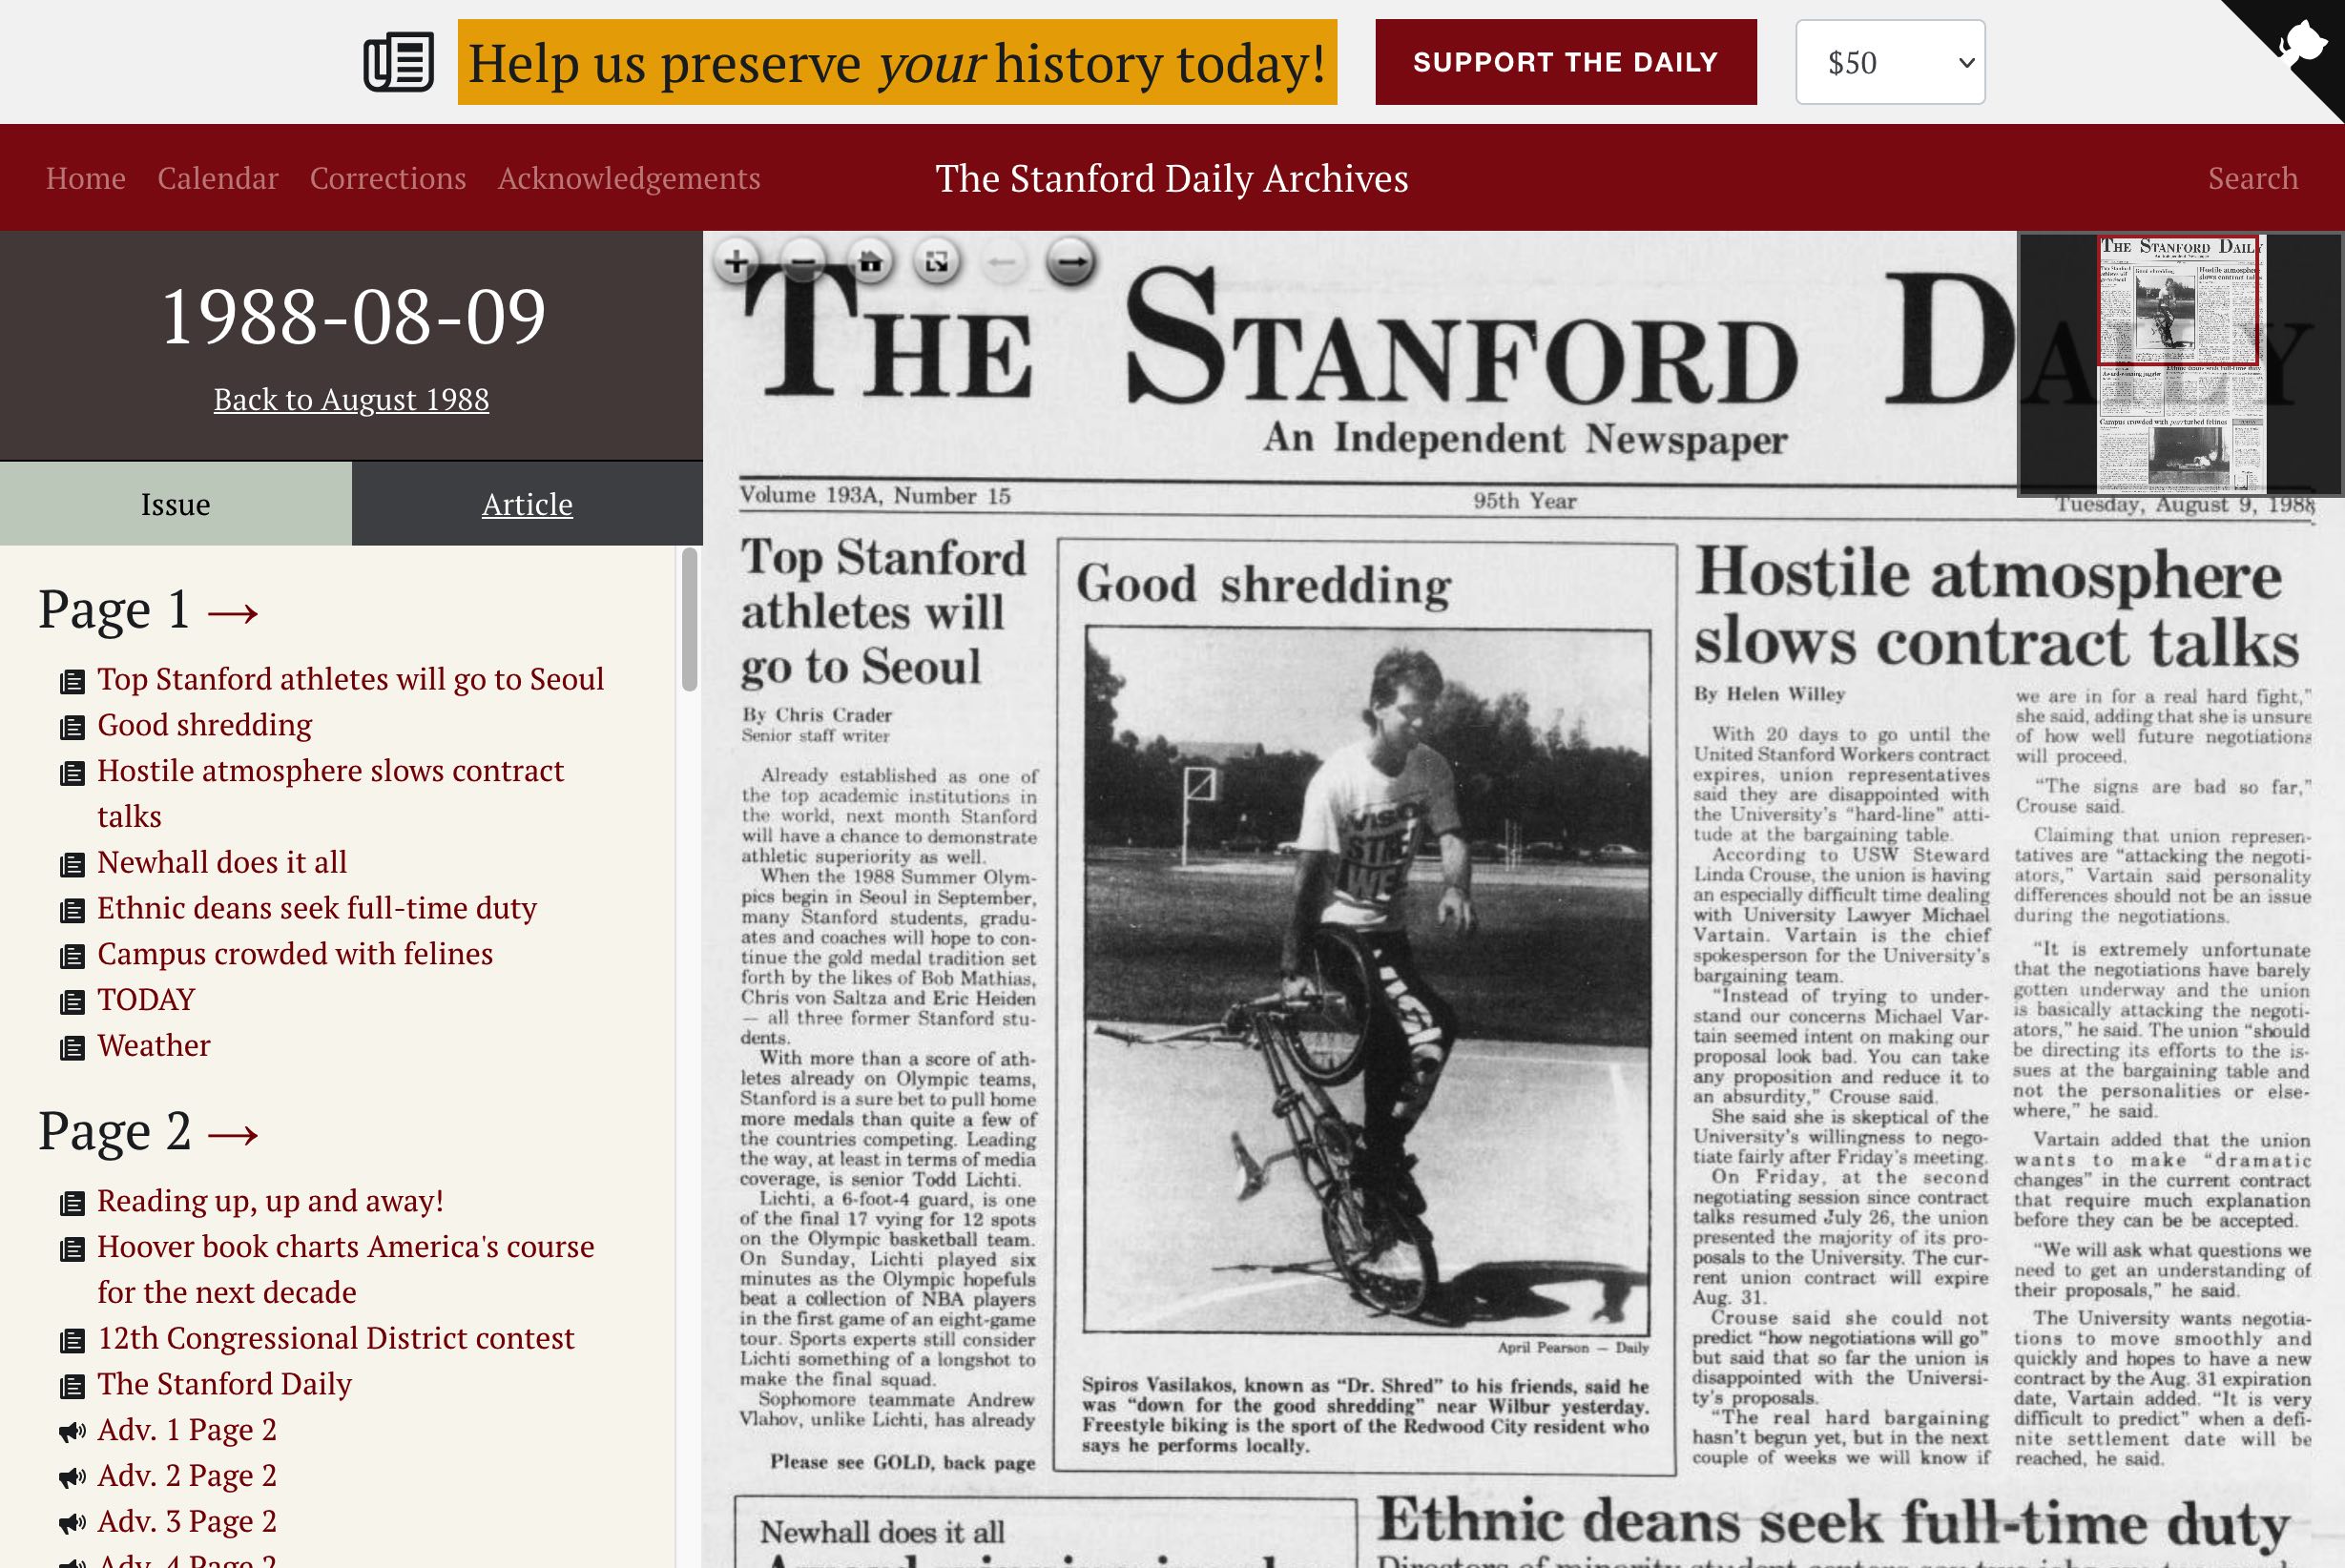 The Stanford Daily Archives